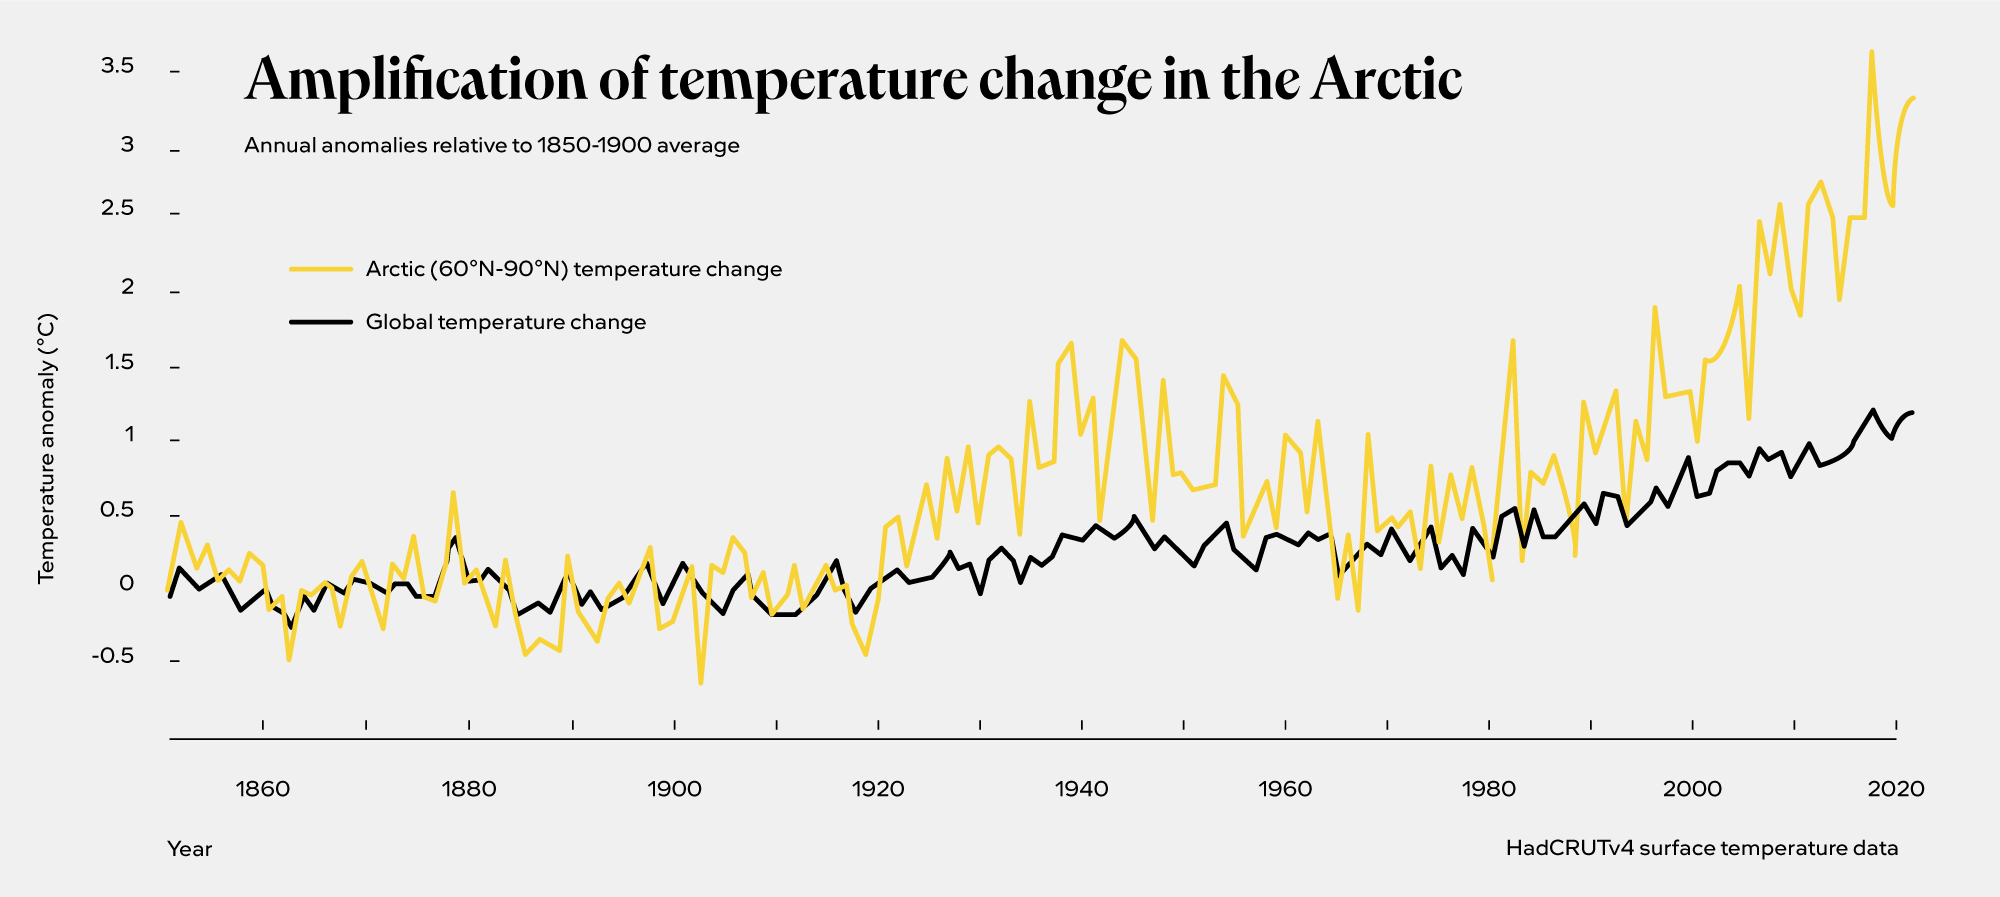 Chart showing amplification of temperature change in the Arctic, 1850-2020